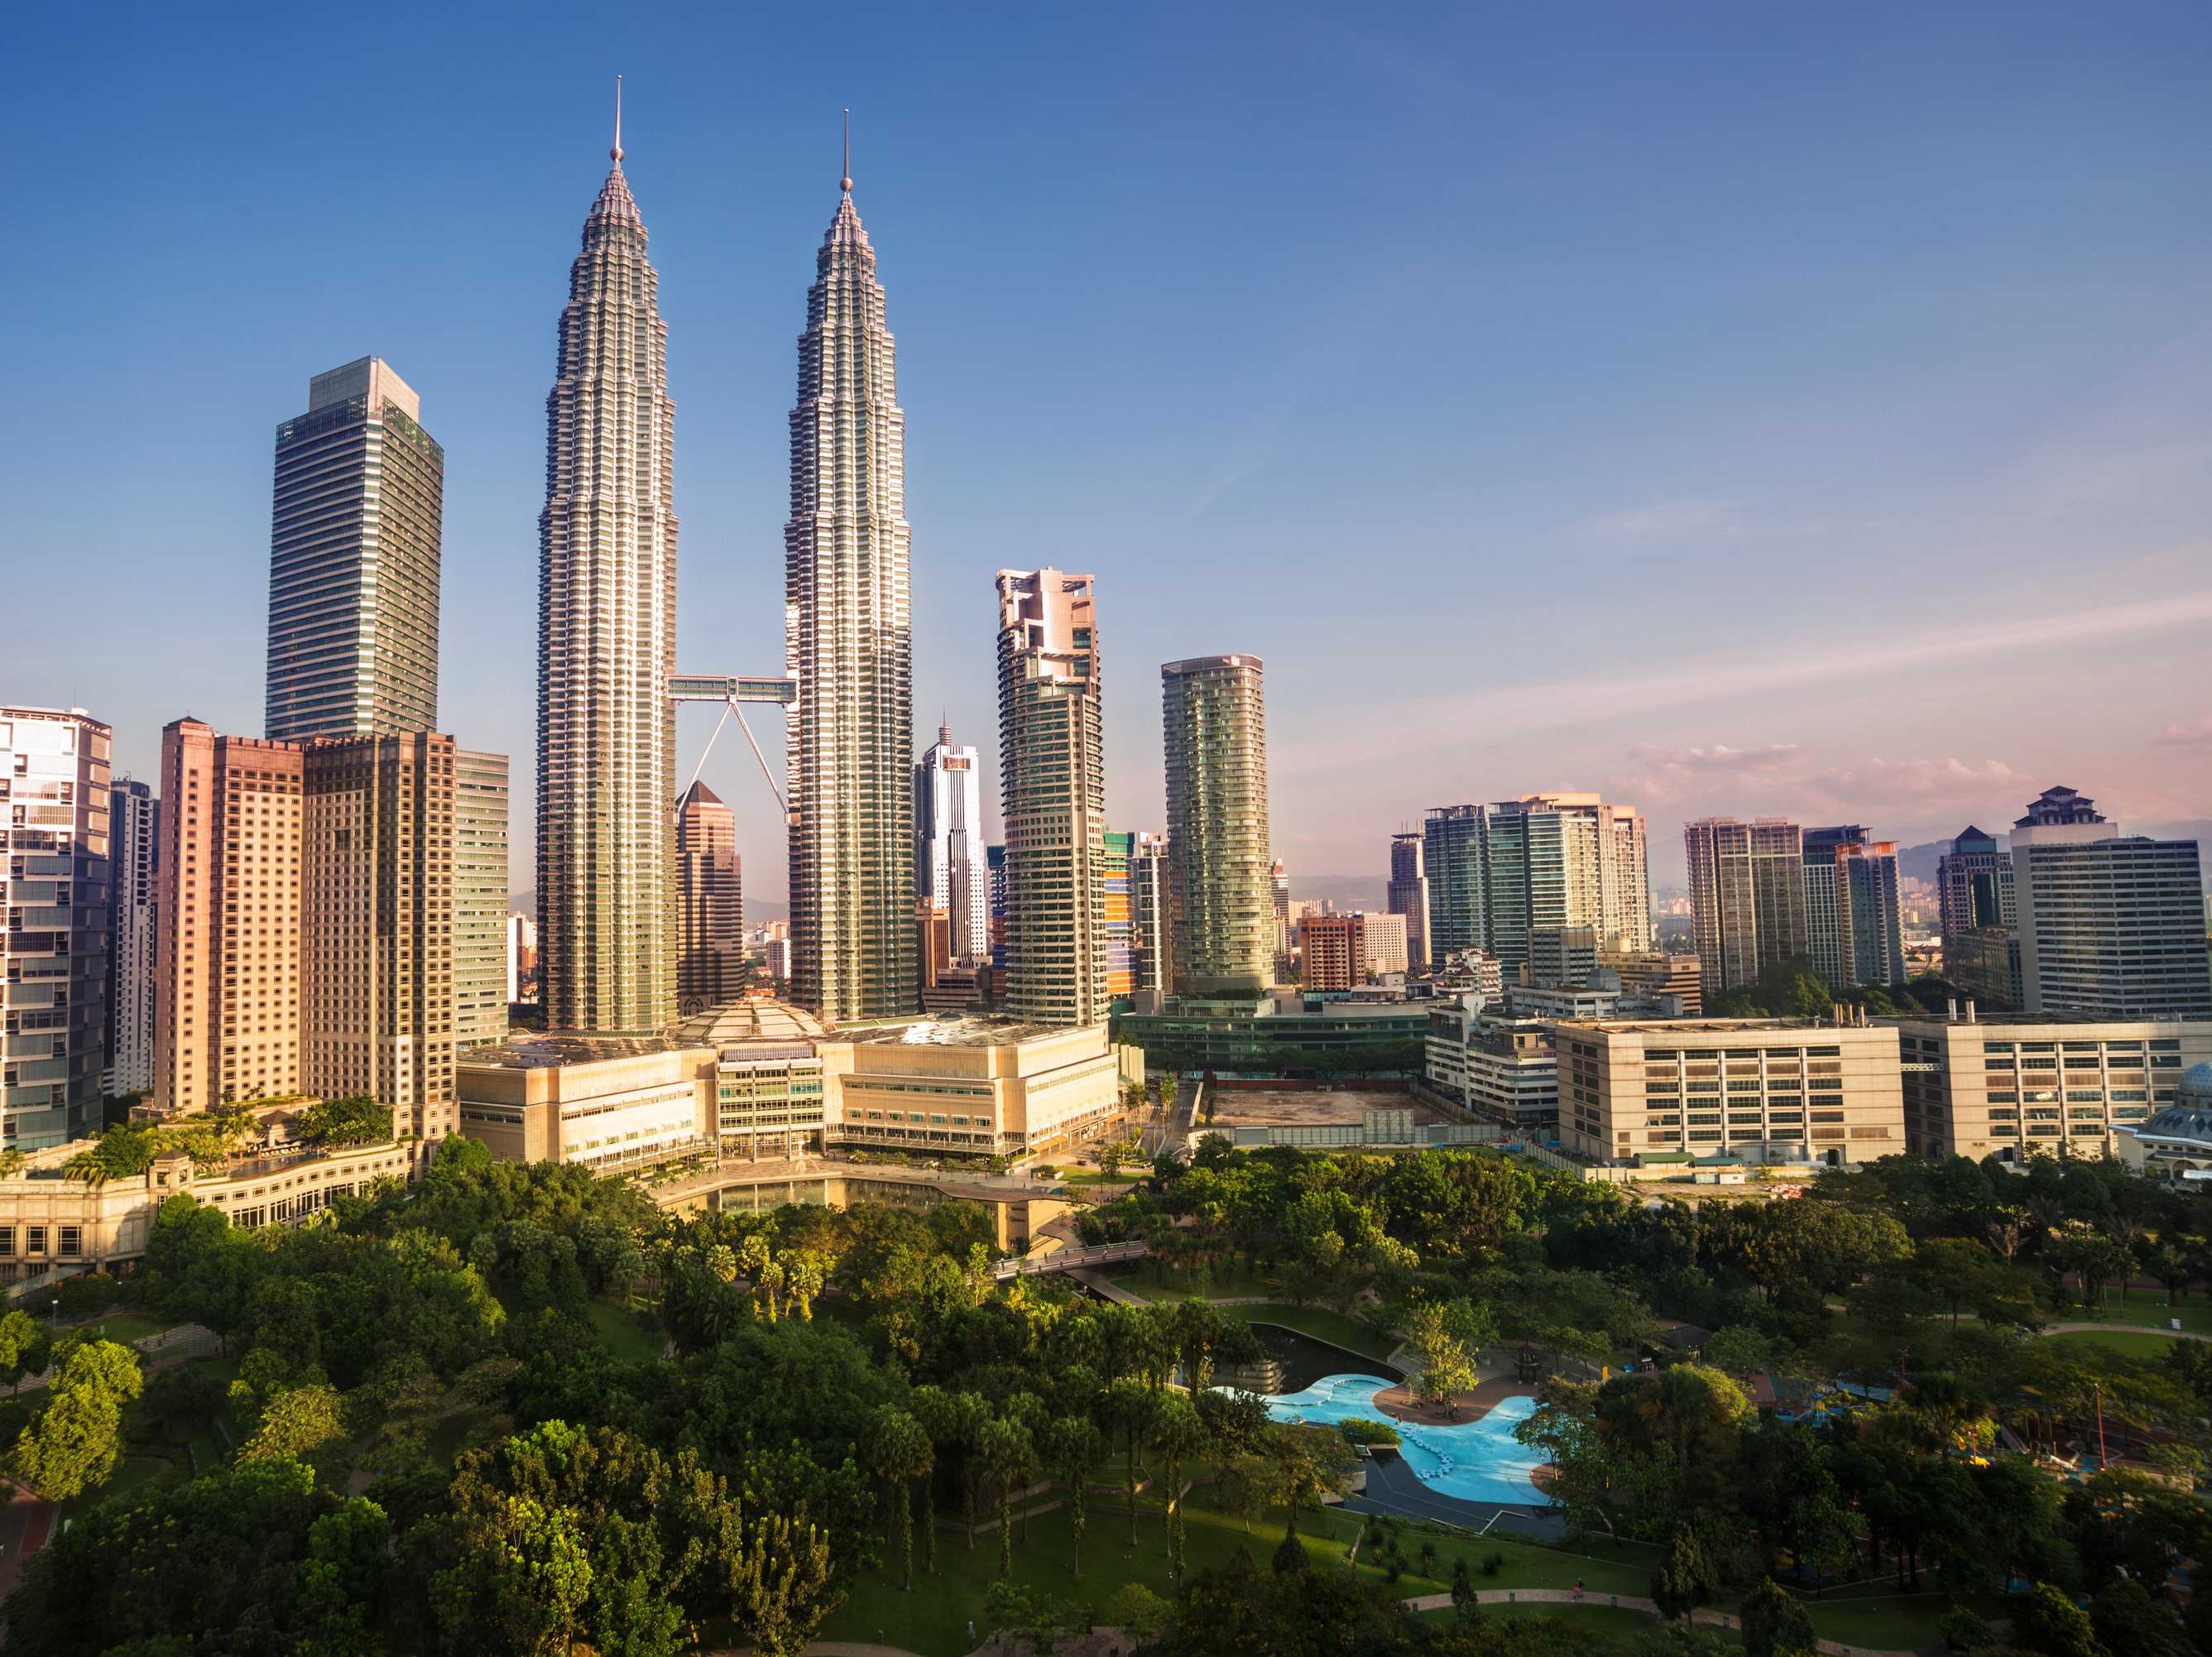 Malaysia Travel Guide Tips and Advice for a Memorable Trip